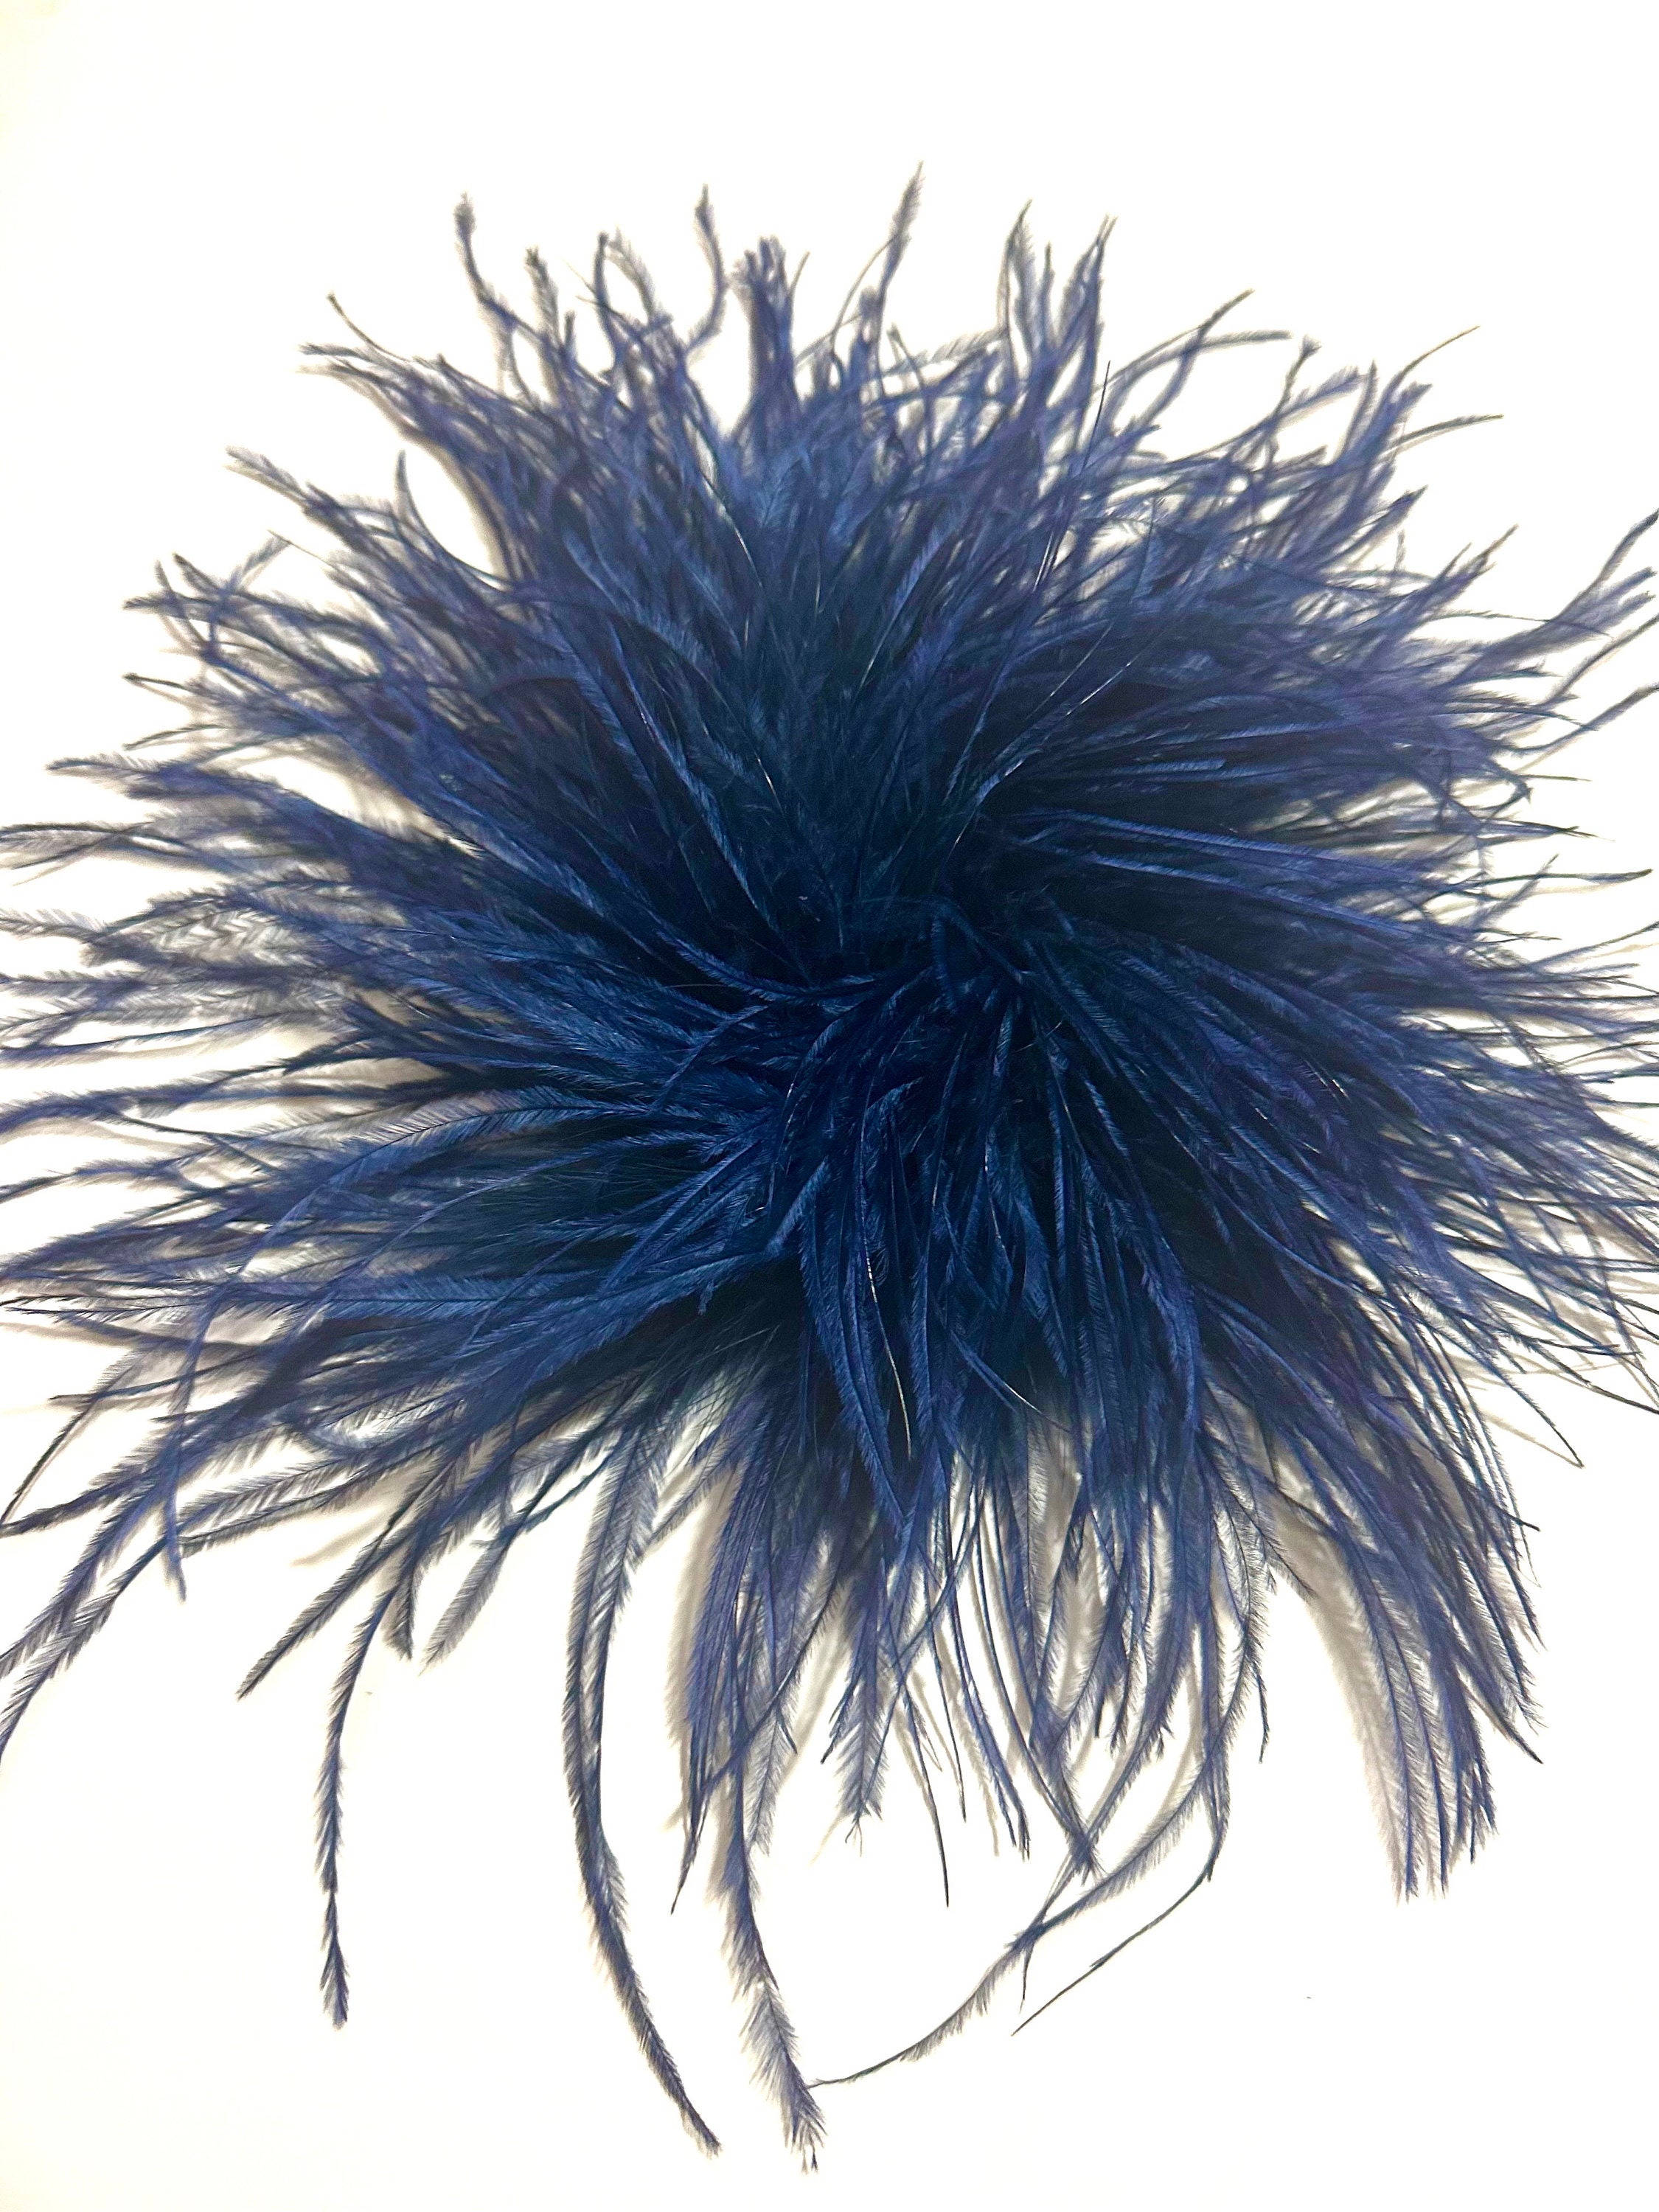 Ostrich Feather Trim, Add on Feather for Cuffs, Shoes, Ostrich